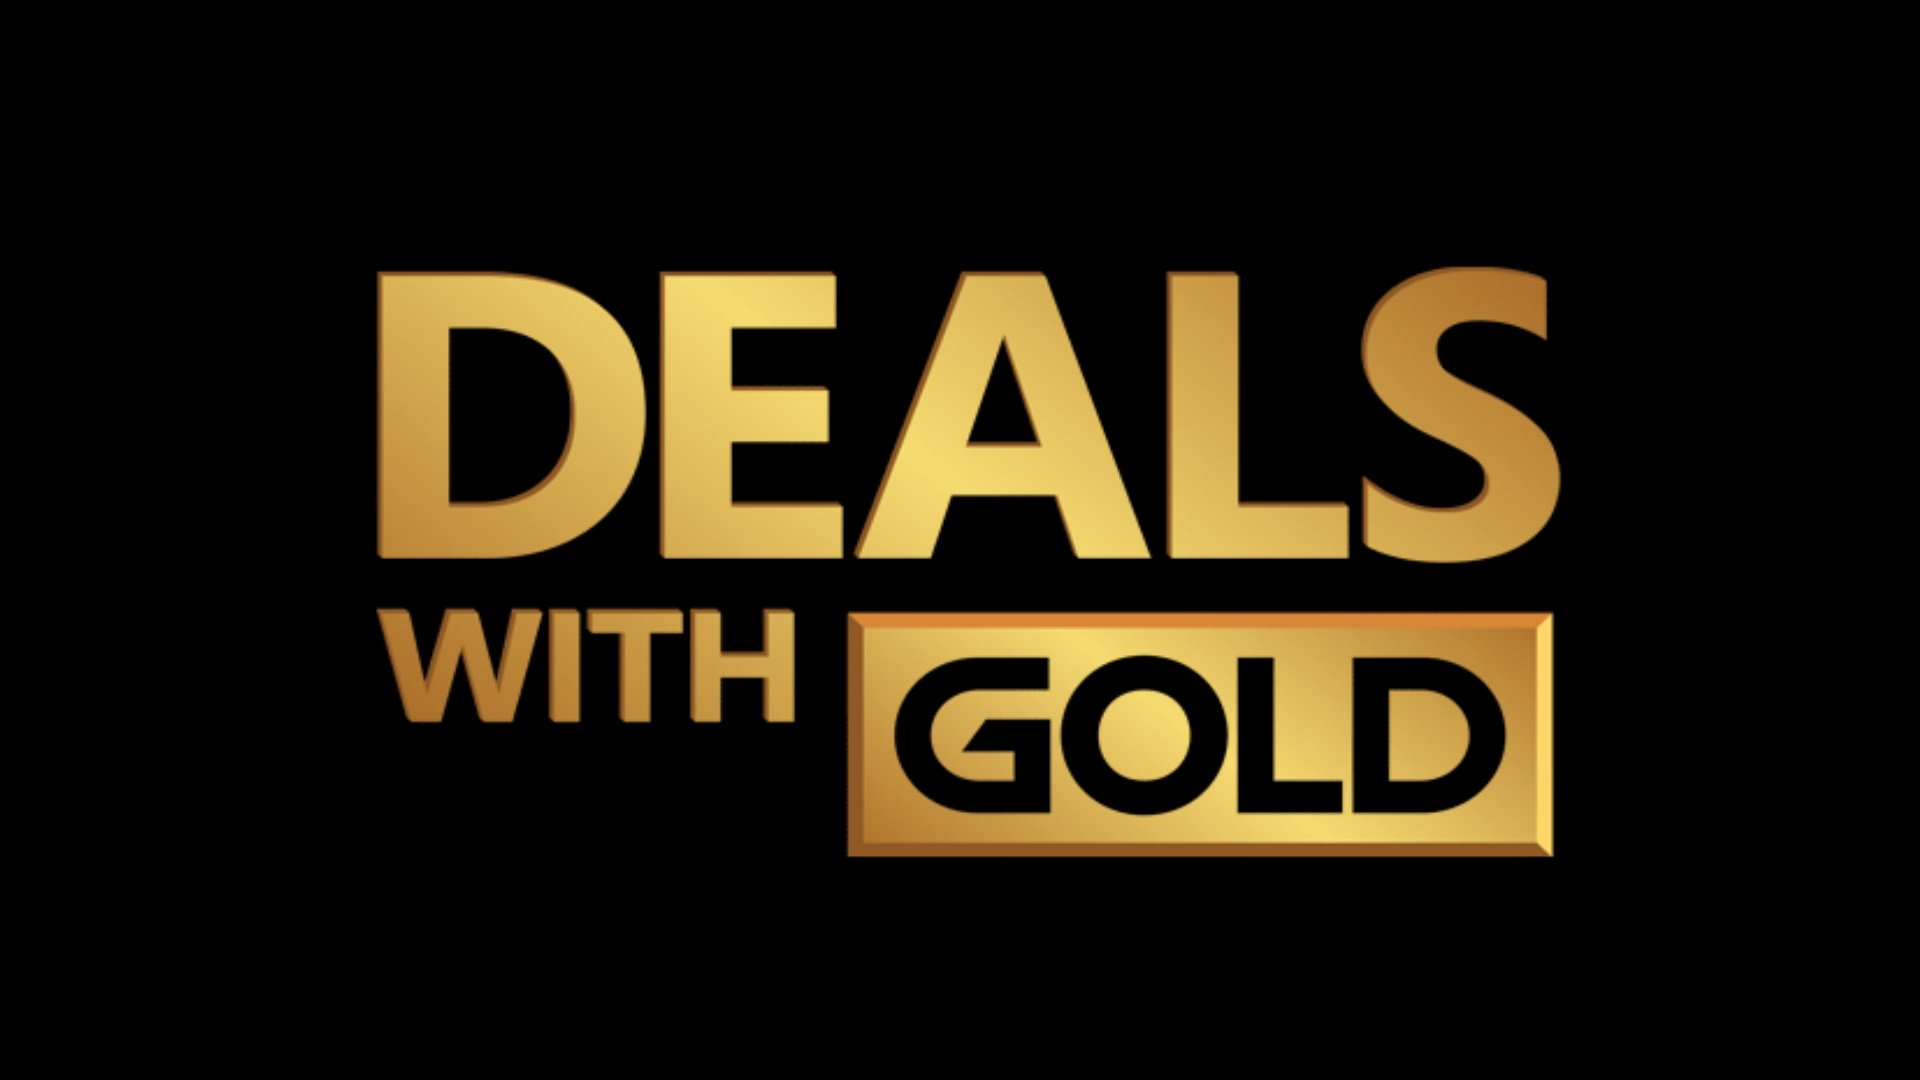 This Week’s Deals with Gold and Spotlight Sale 